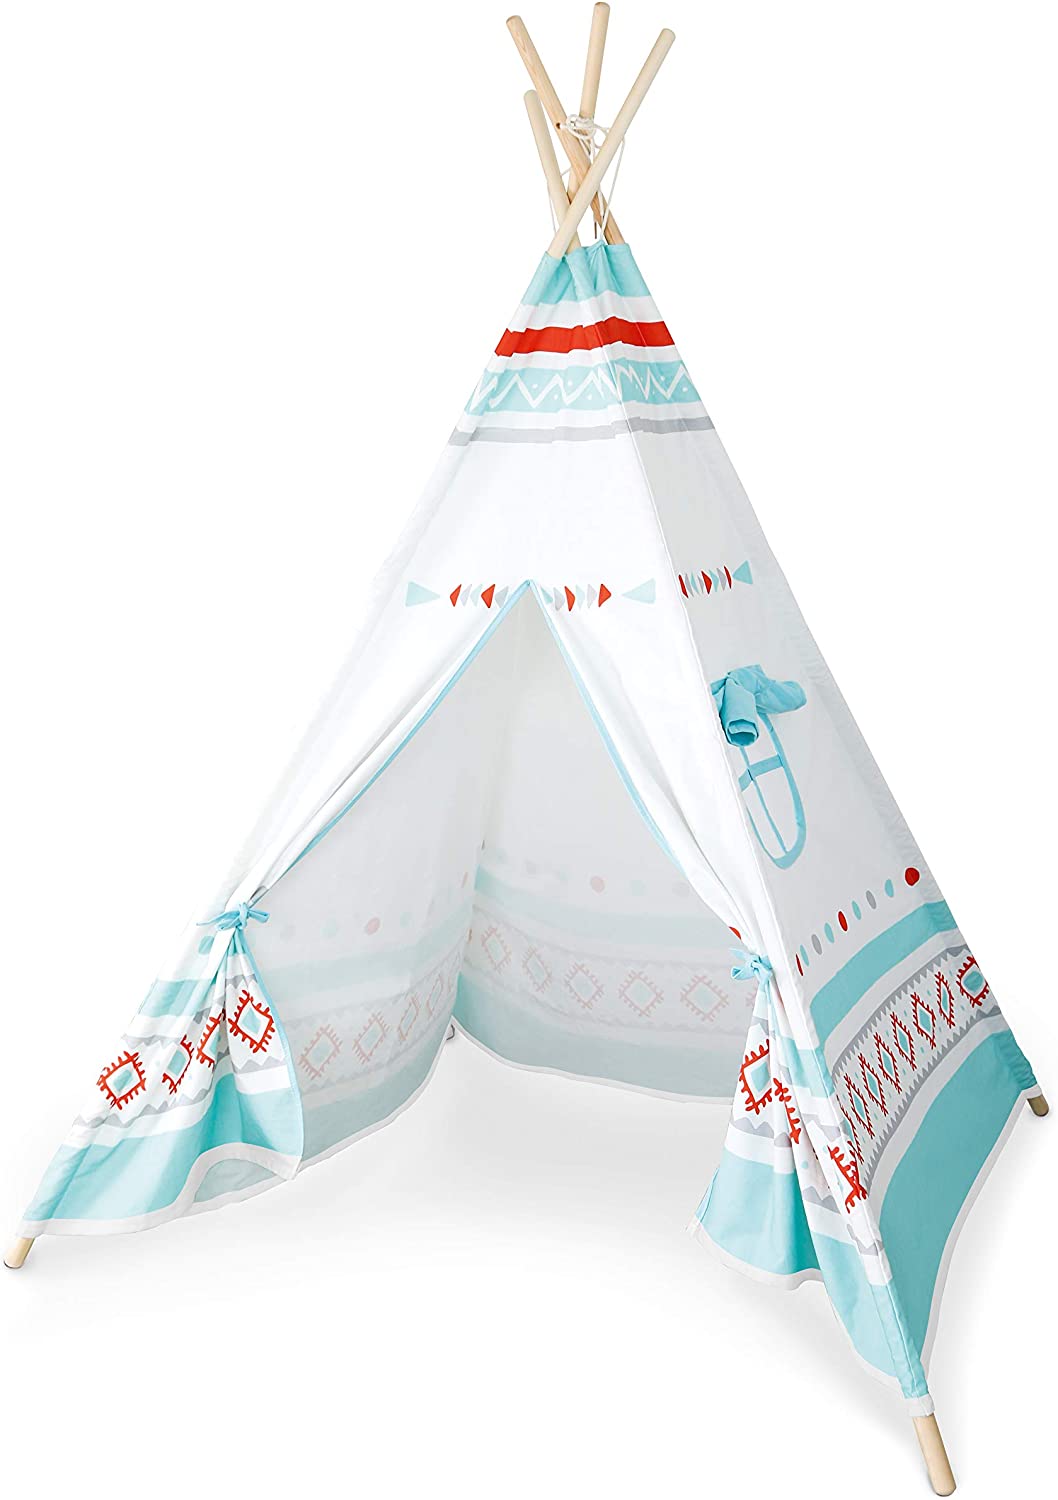 Small Foot 11216 Wooden And Cotton Teepee Toy, Multicolored